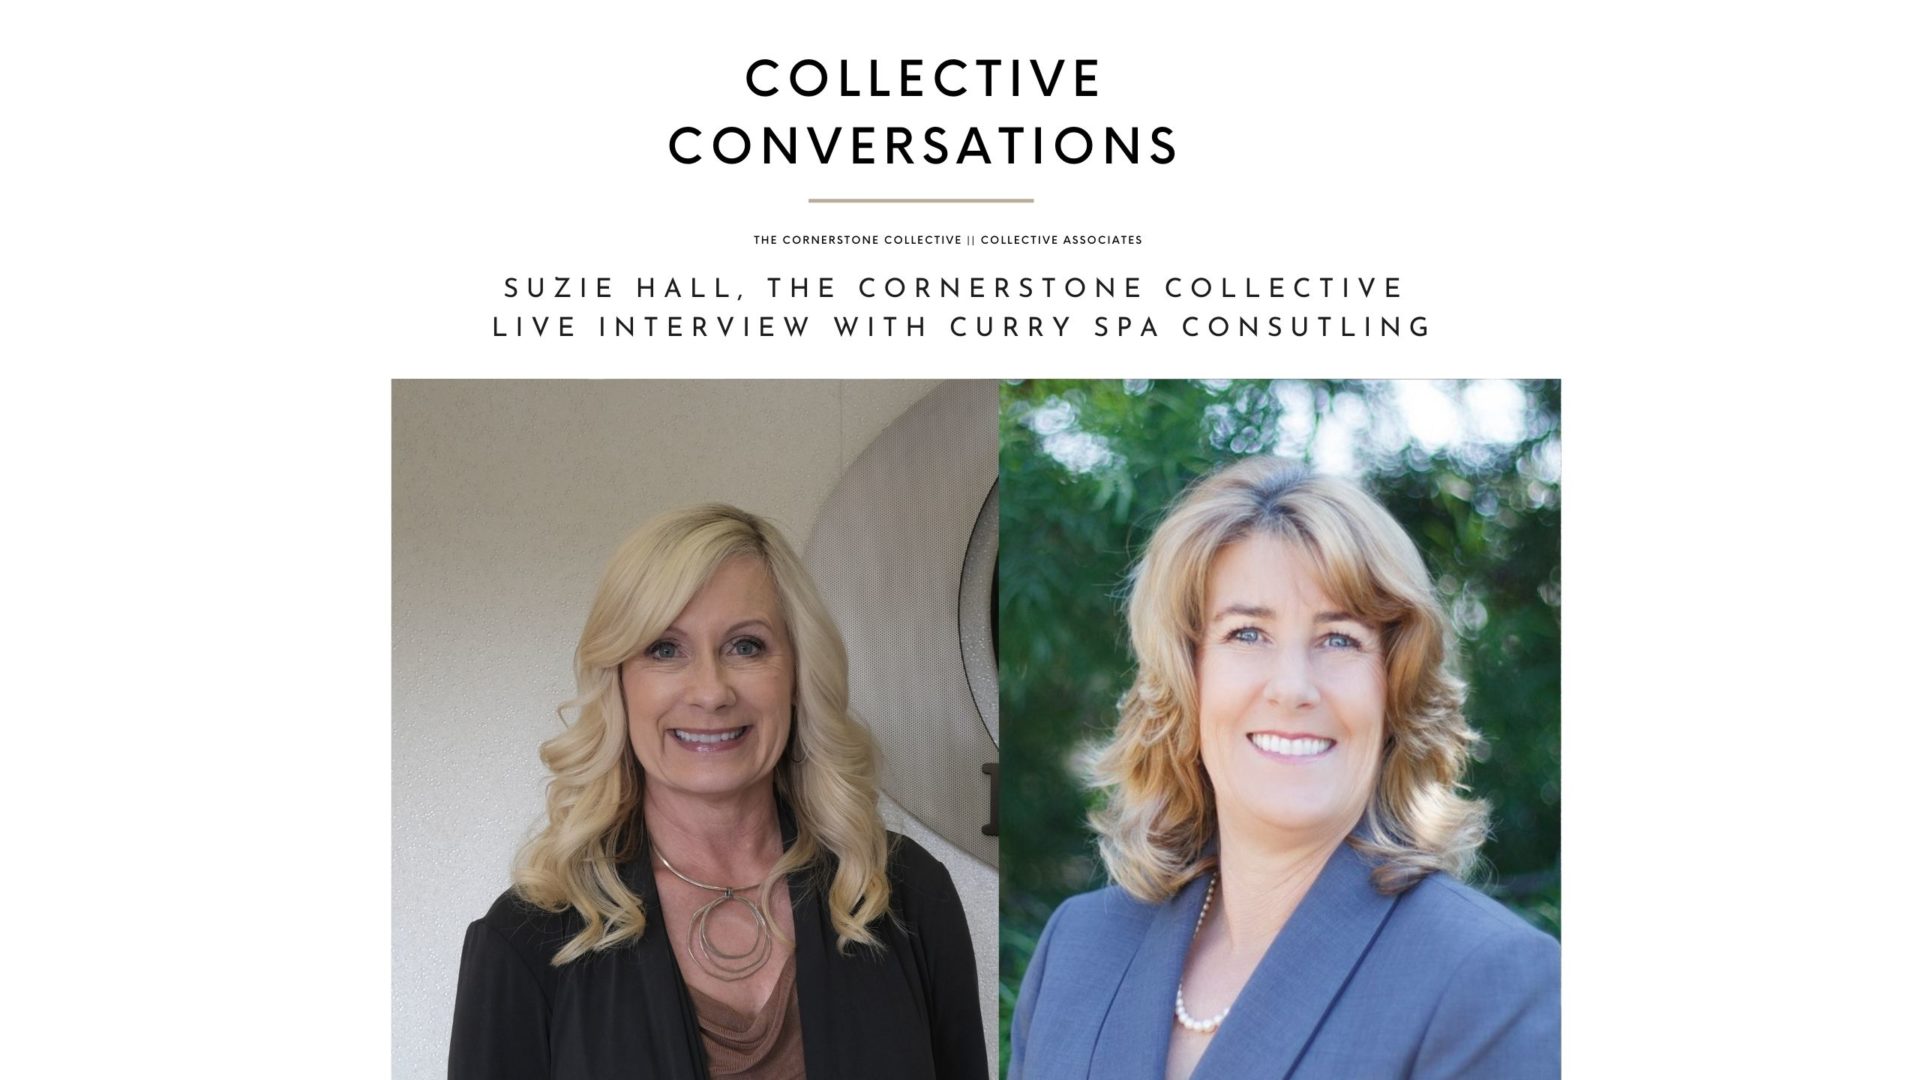 Conversations With Our Collective Associates: Curry Spa Consulting